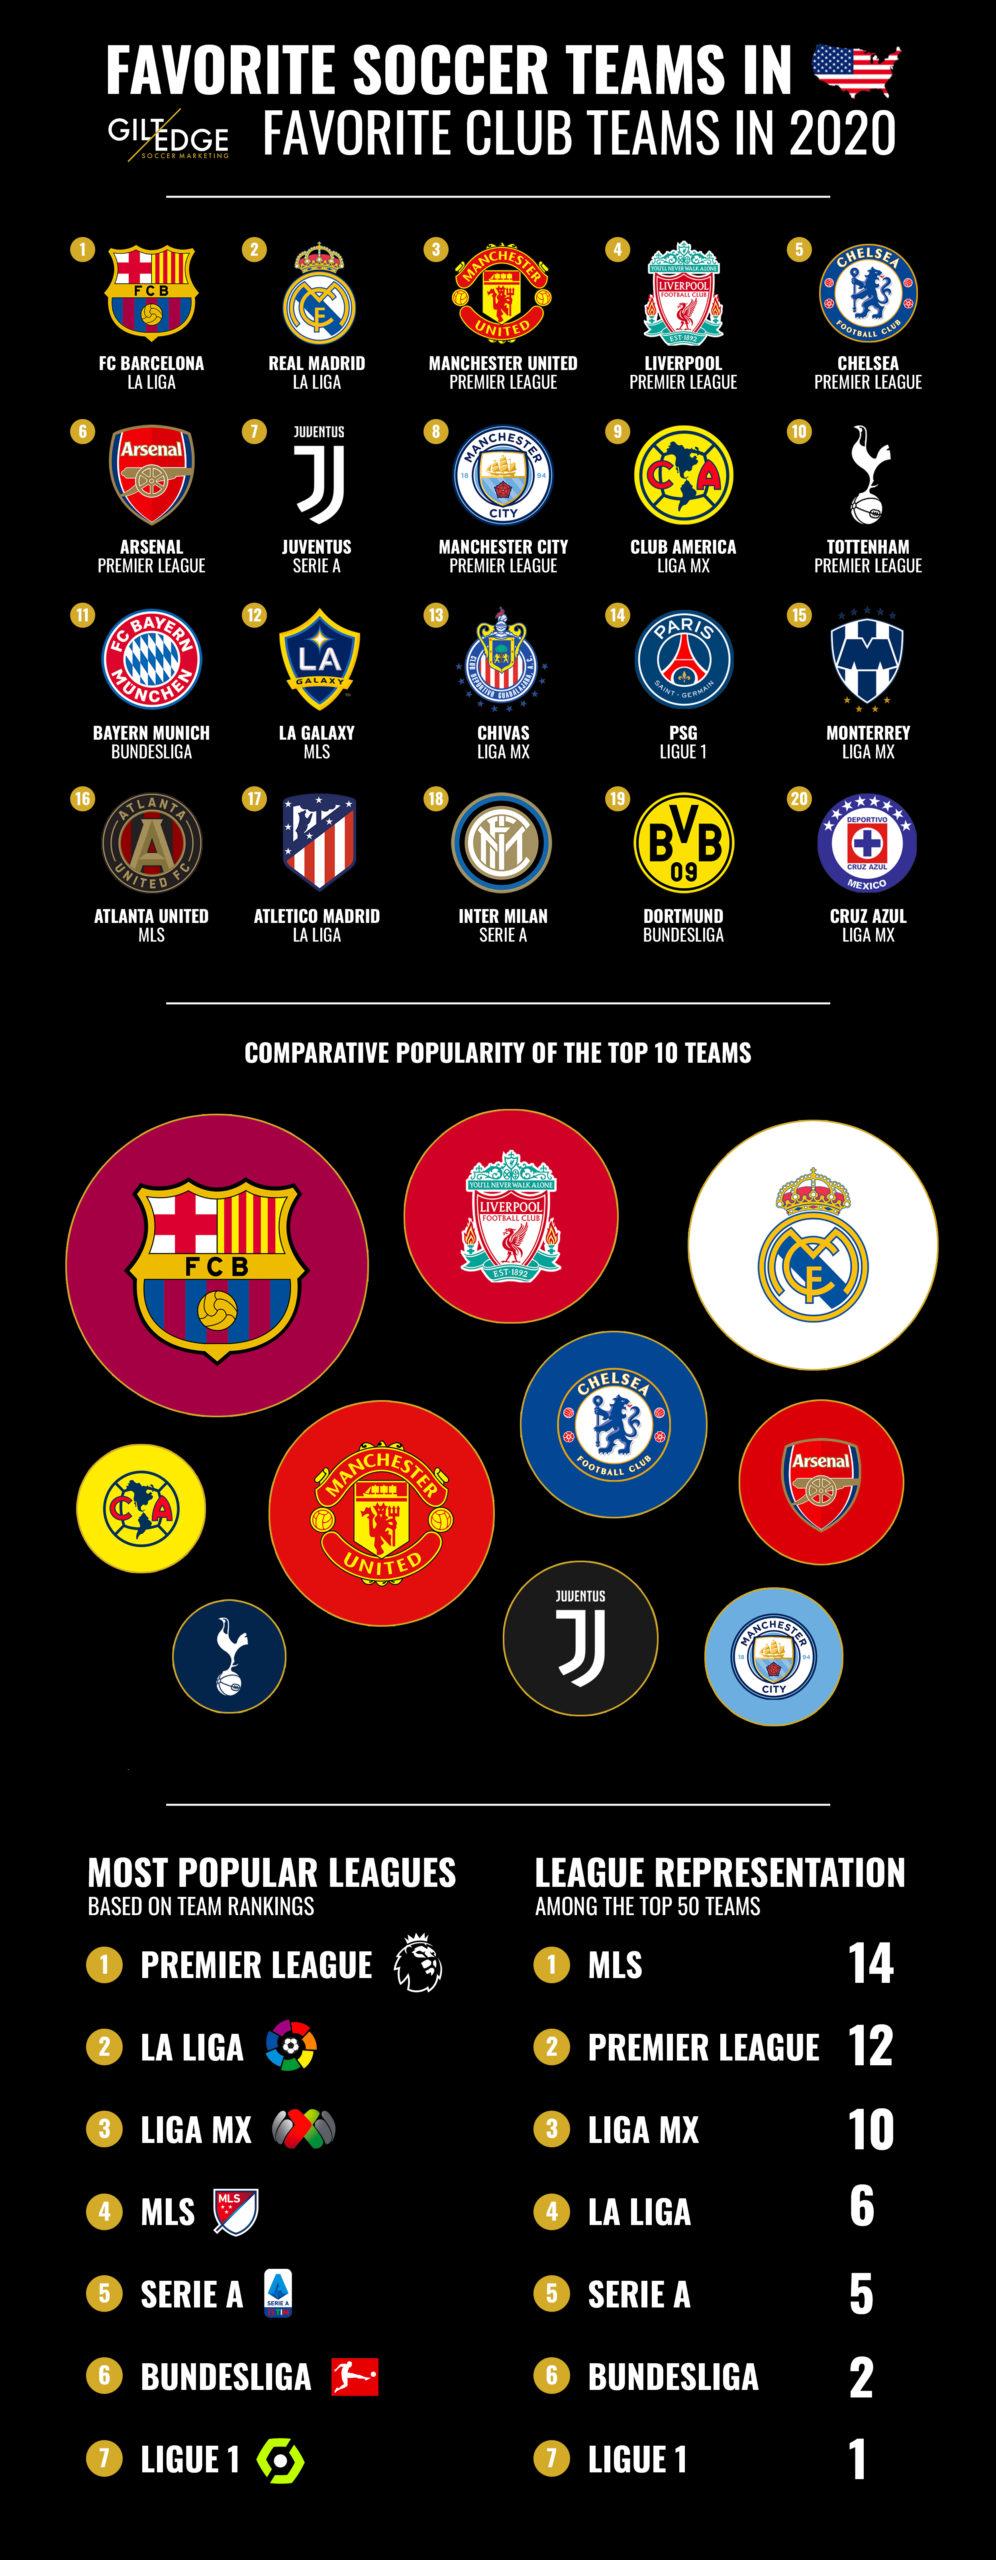 The Most Popular Soccer Teams in the U.S.